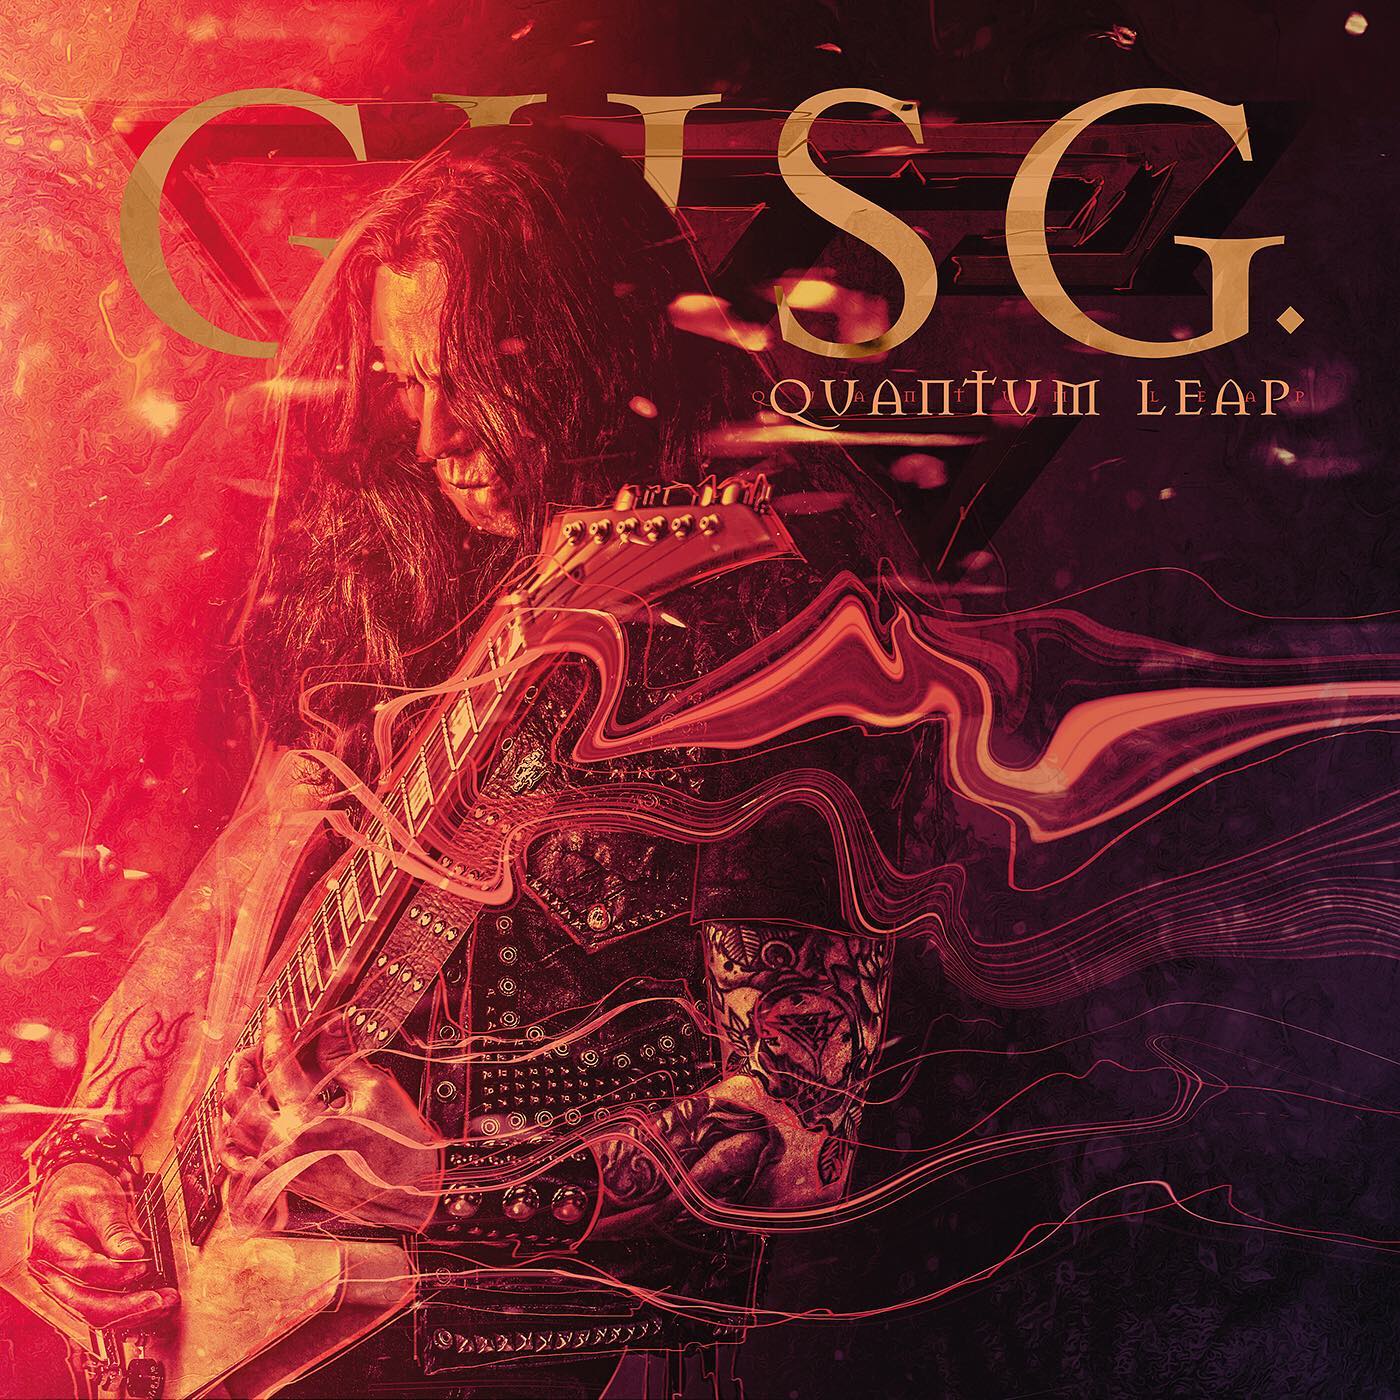 NY VIDEO: Gus G. - Enigma Of Life 1